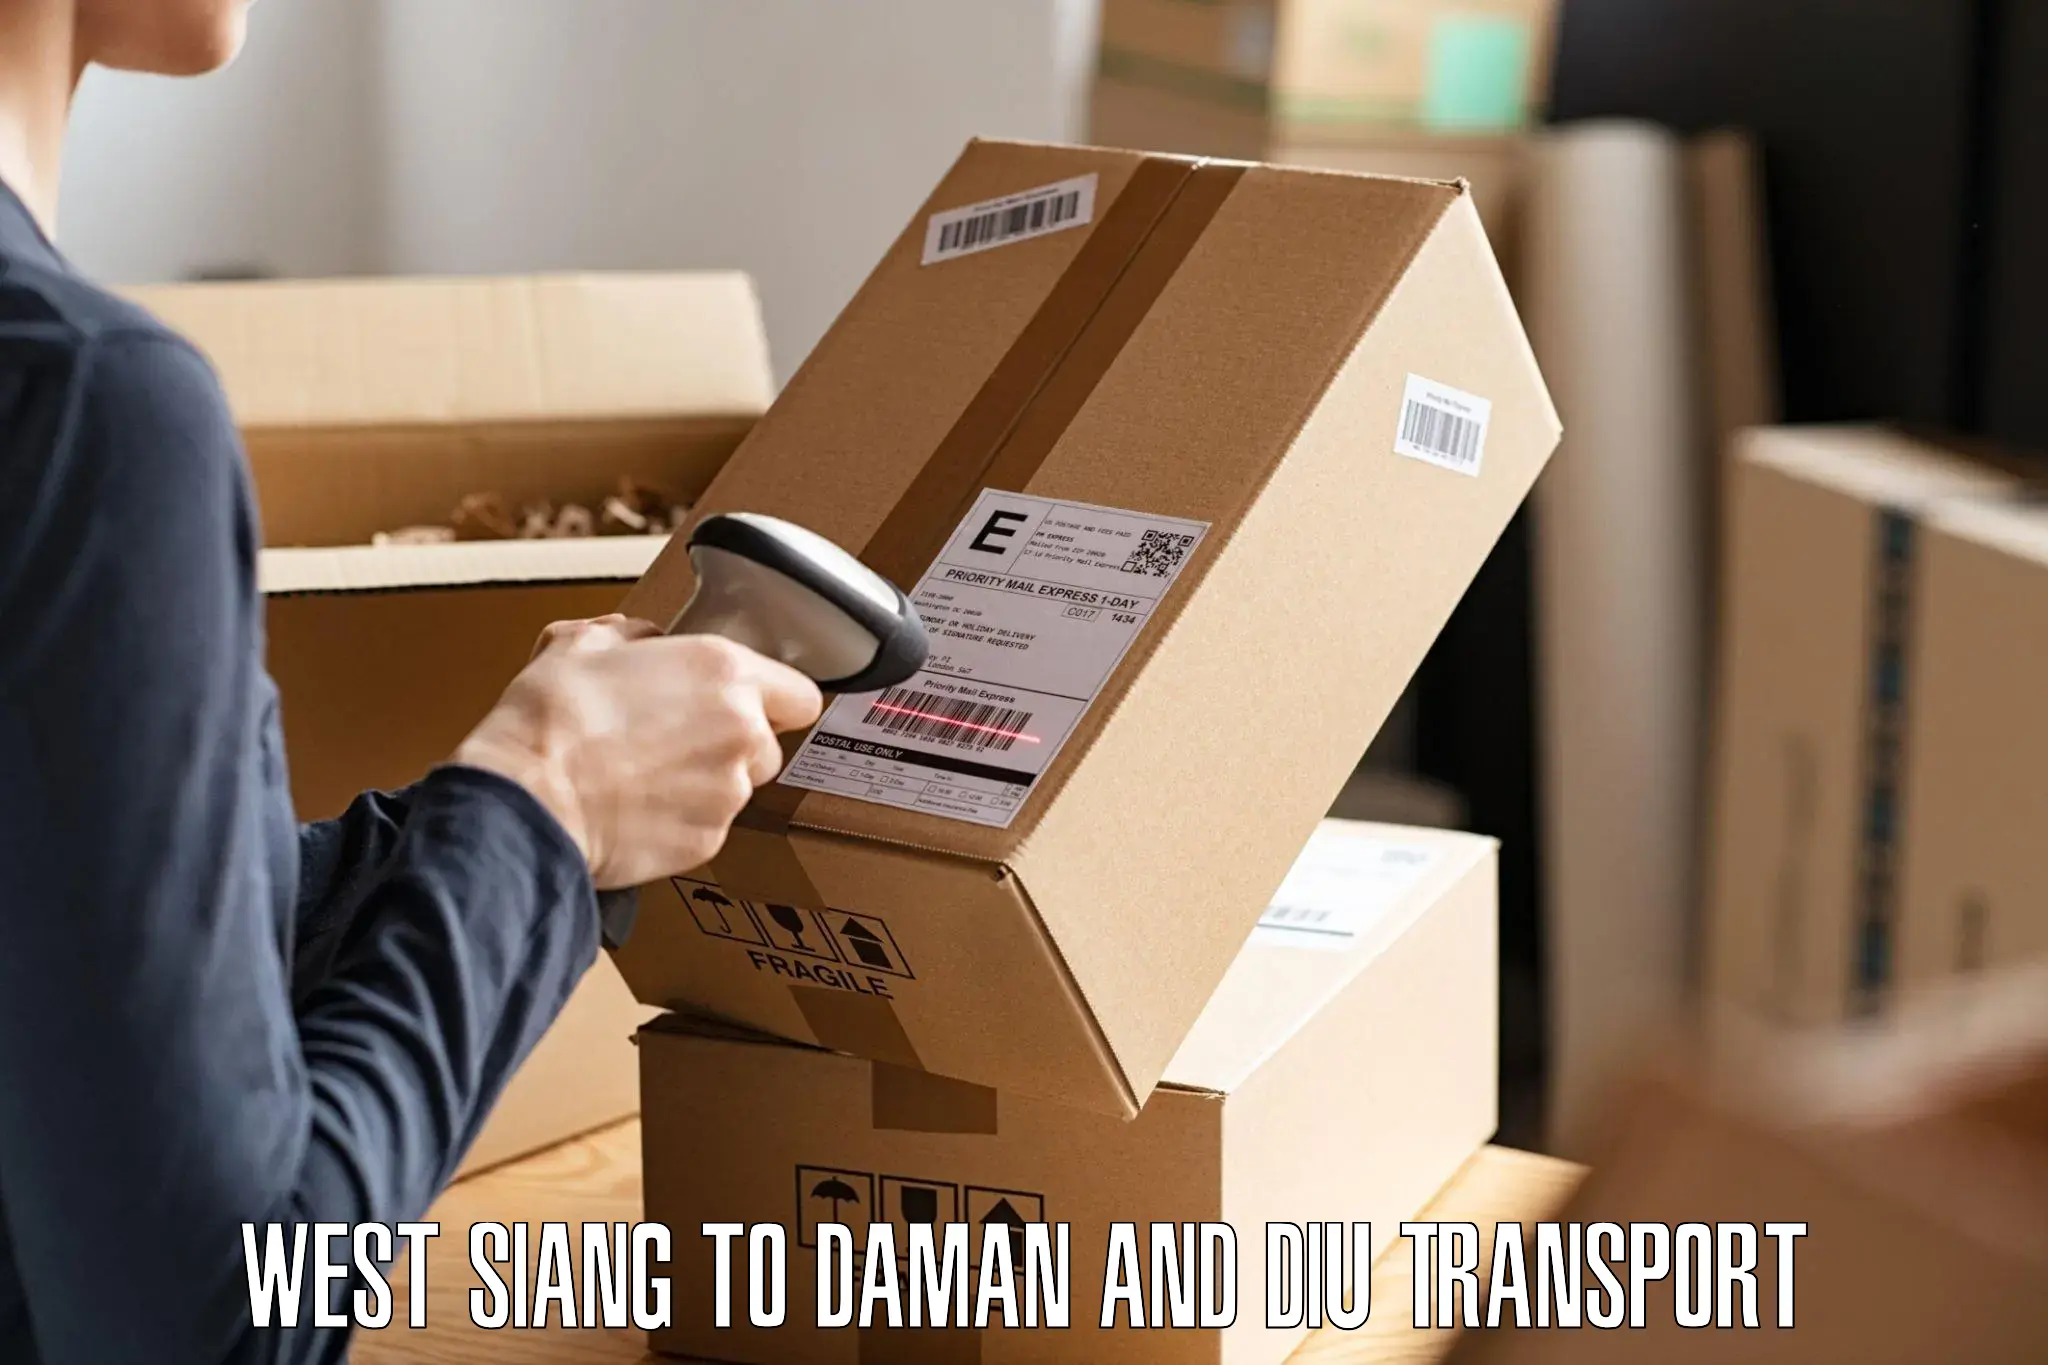 Air freight transport services in West Siang to Daman and Diu